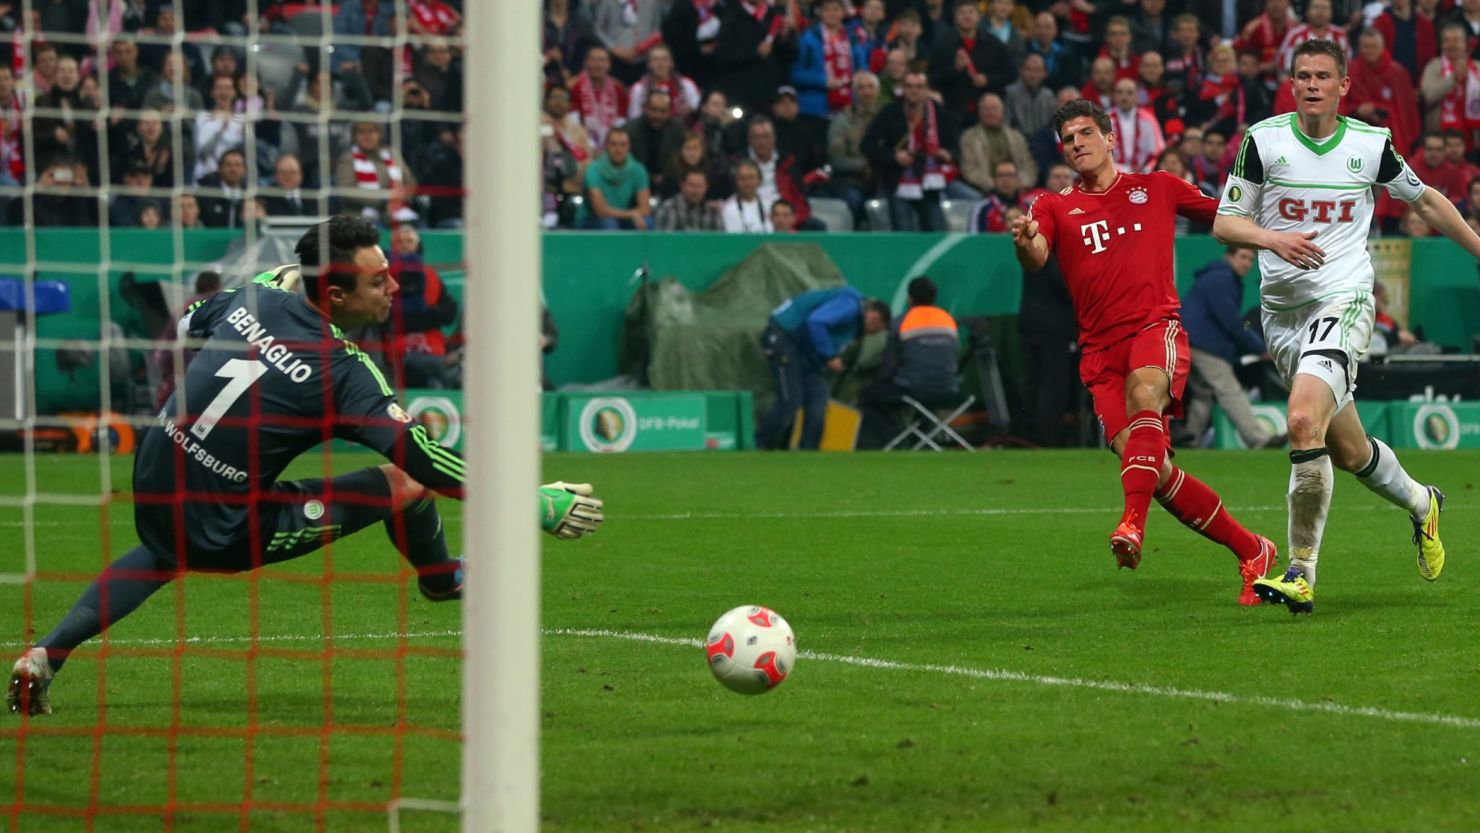 Mario Gomez fires home as Bayern Munich continued their march towards the German Cup title